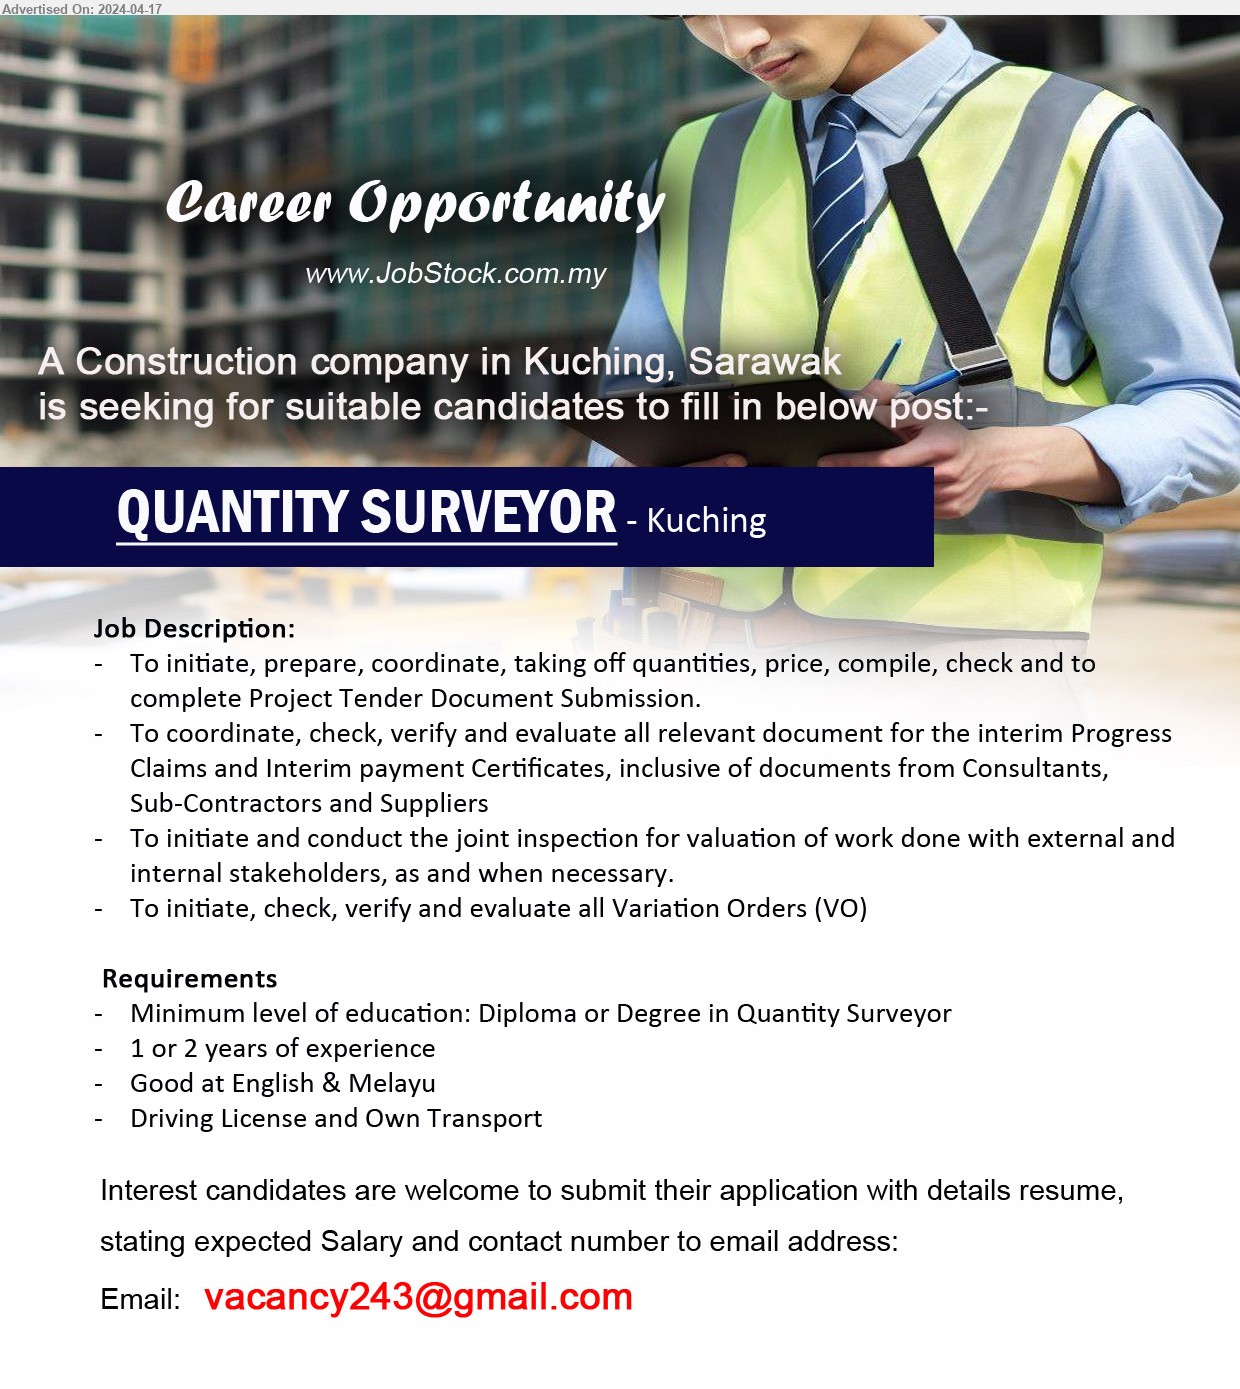 ADVERTISER (Construction Company) - QUANTITY SURVEYOR  (Kuching), Diploma or Degree in Quantity Surveyor, 1 or 2 years of experience,...
Email resume to ...
